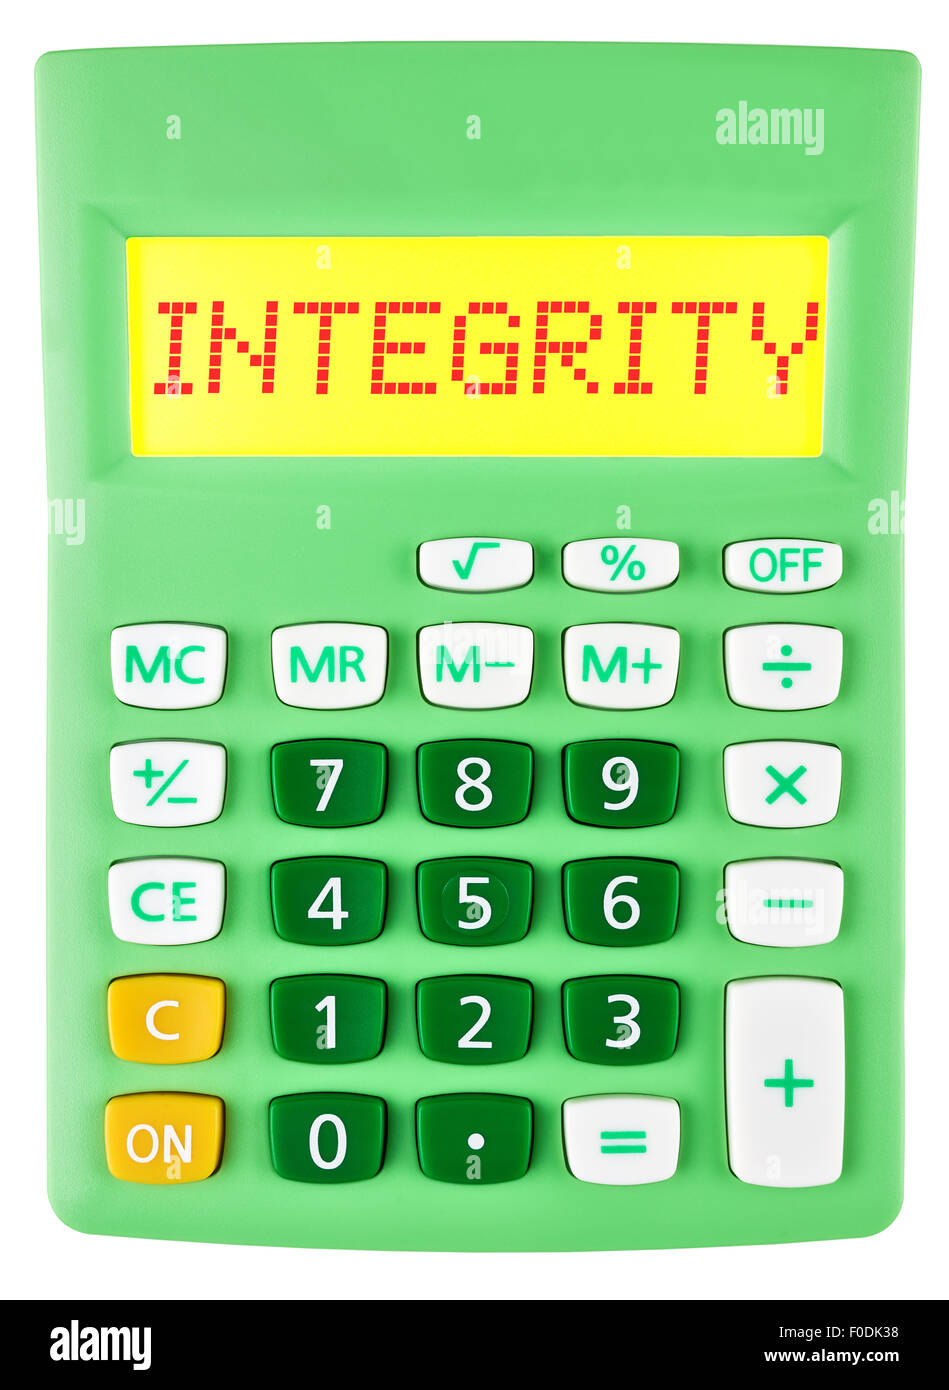 Calculator with INTEGRITY on display Stock Photo